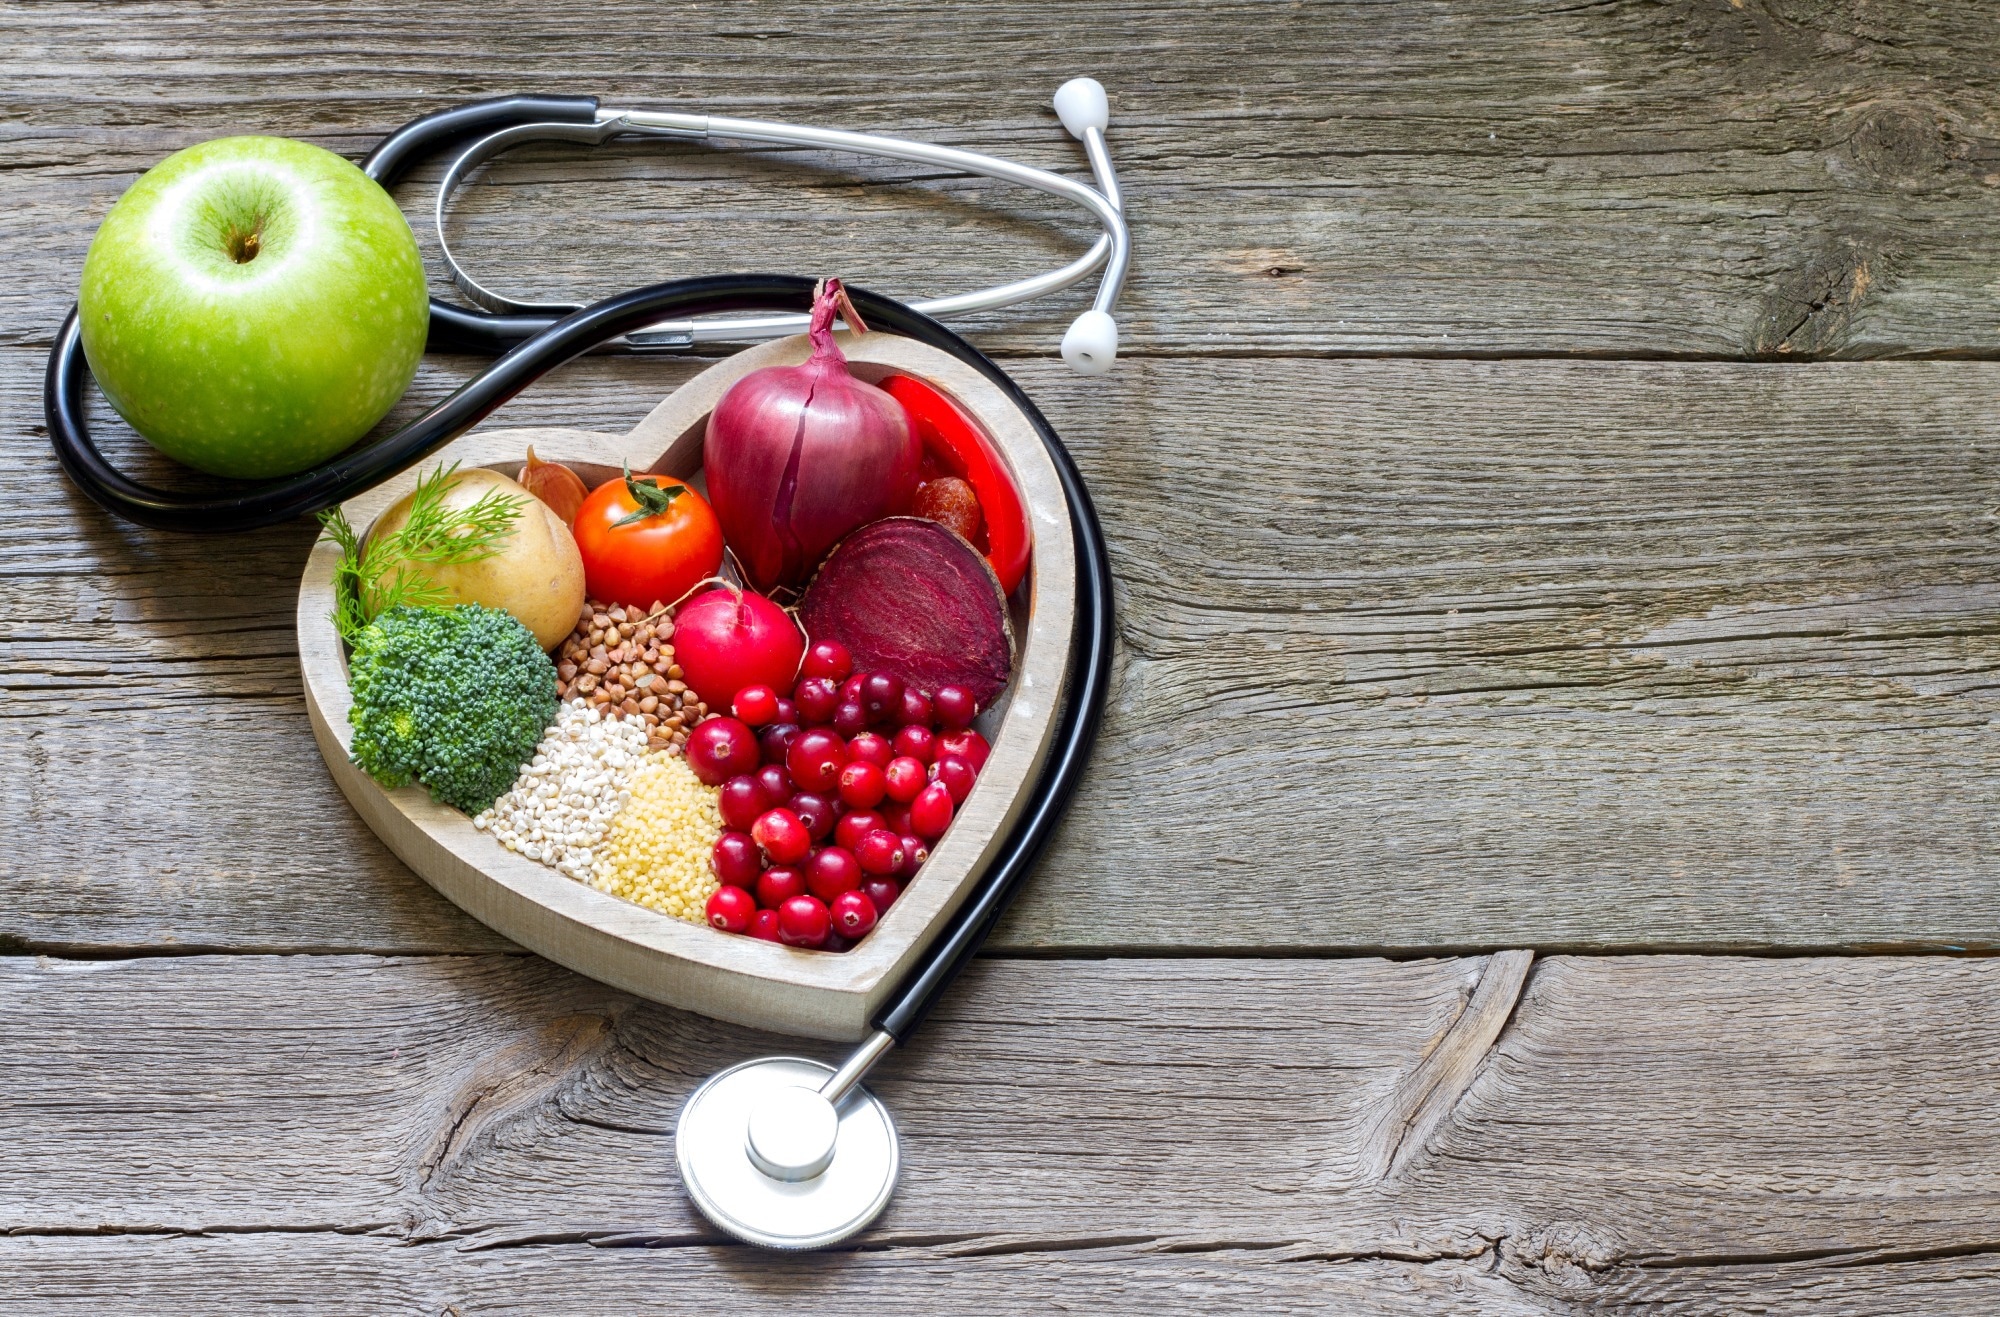 Study: Healthy dietary patterns and the risk of individual chronic diseases in community-dwelling adults. Image Credit: udra11/Shutterstock.com